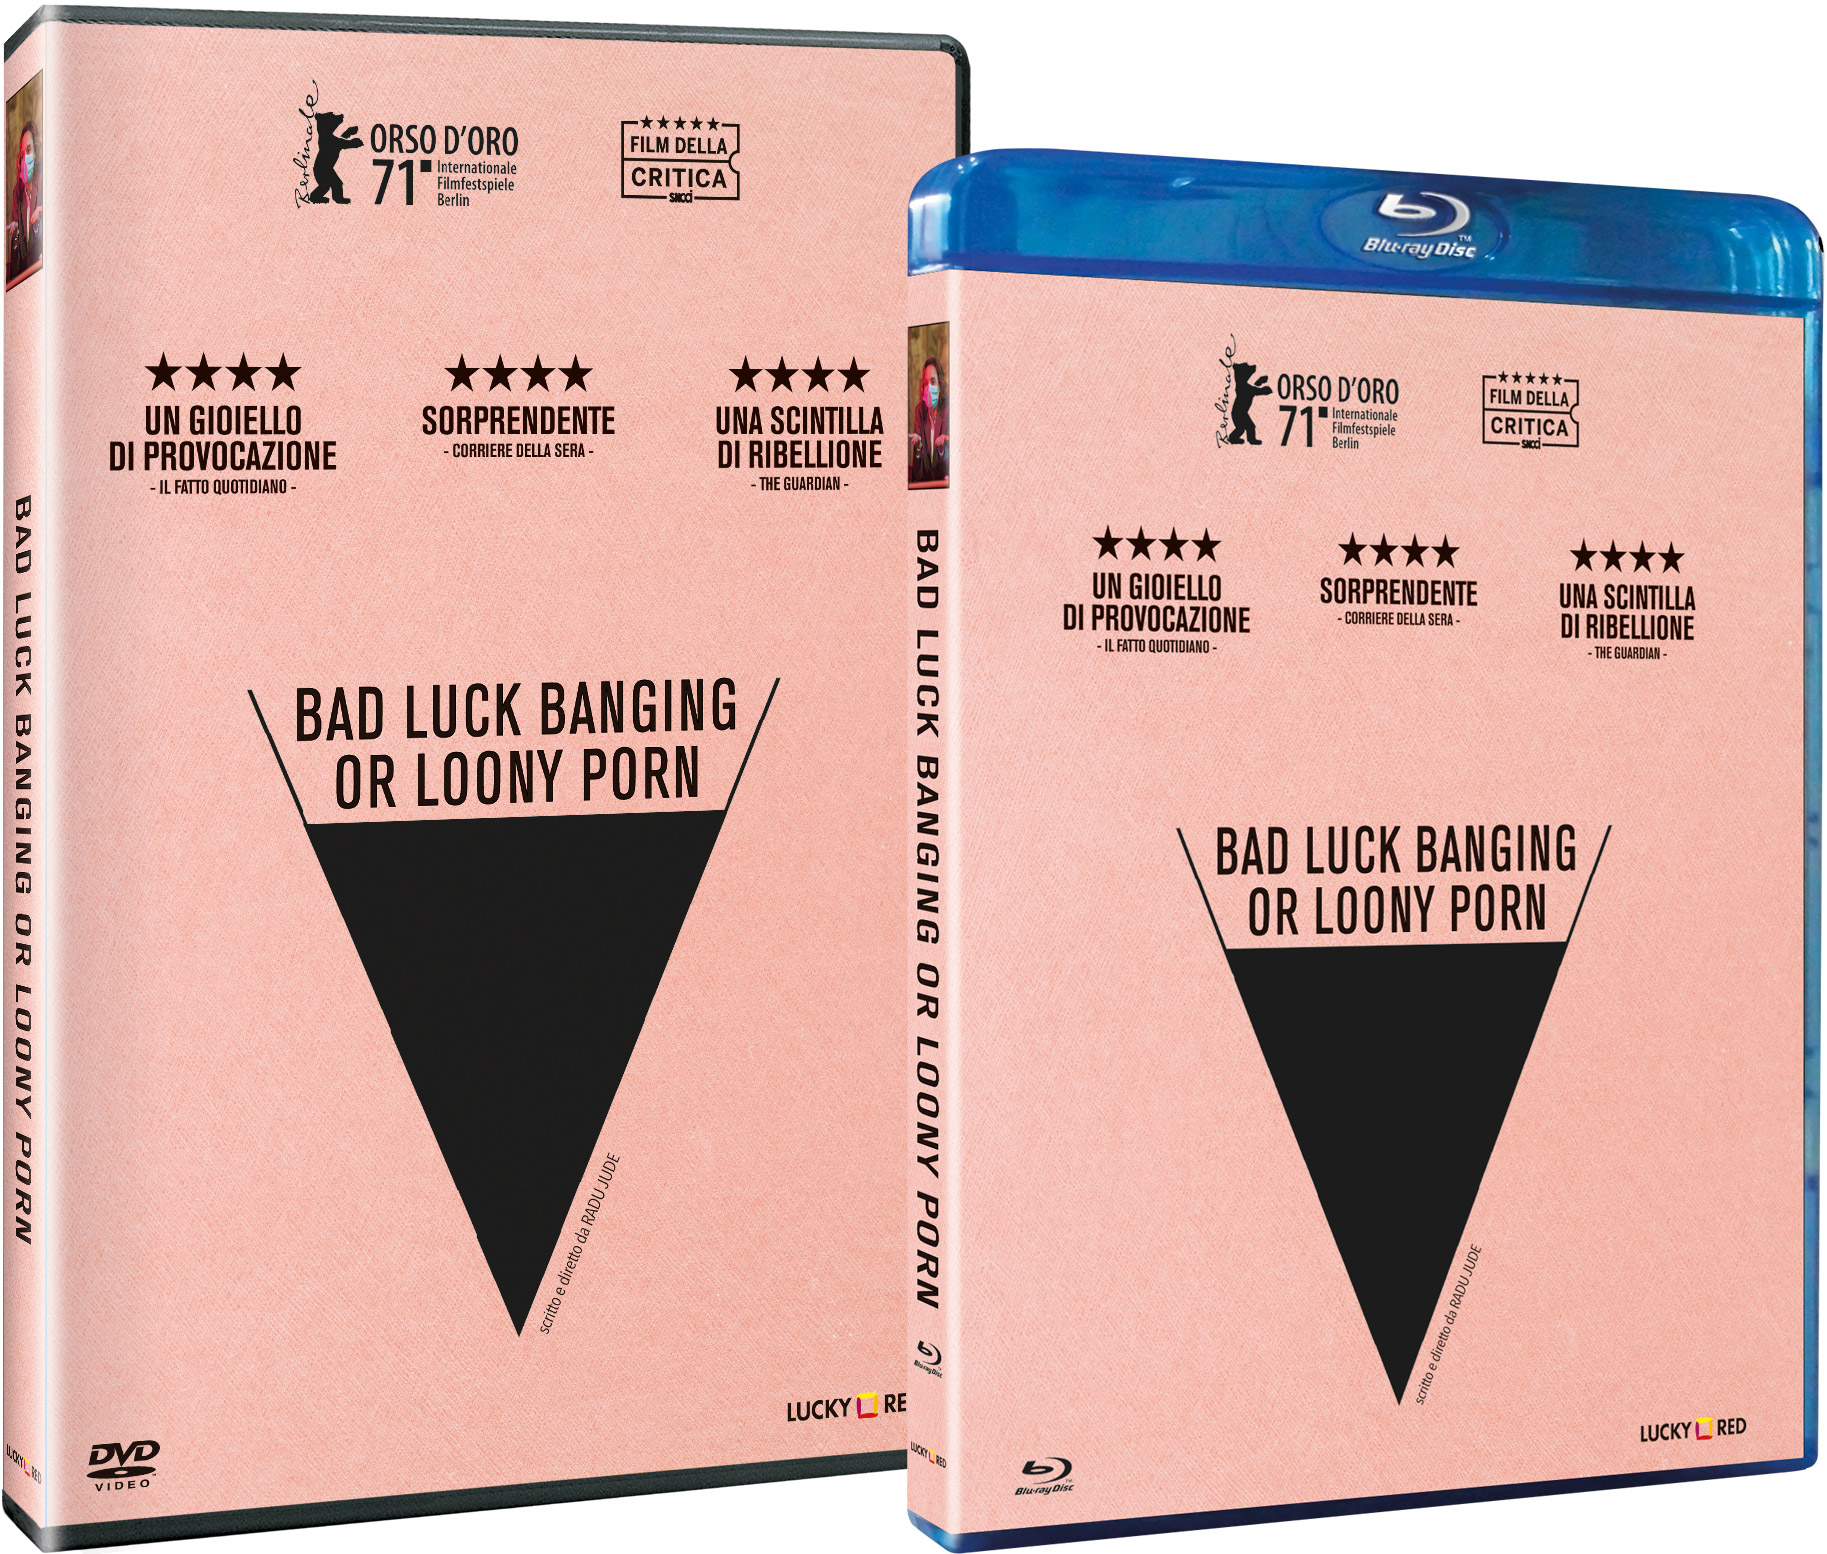 Bad luck banging or loony porn in DVD e Blu-ray